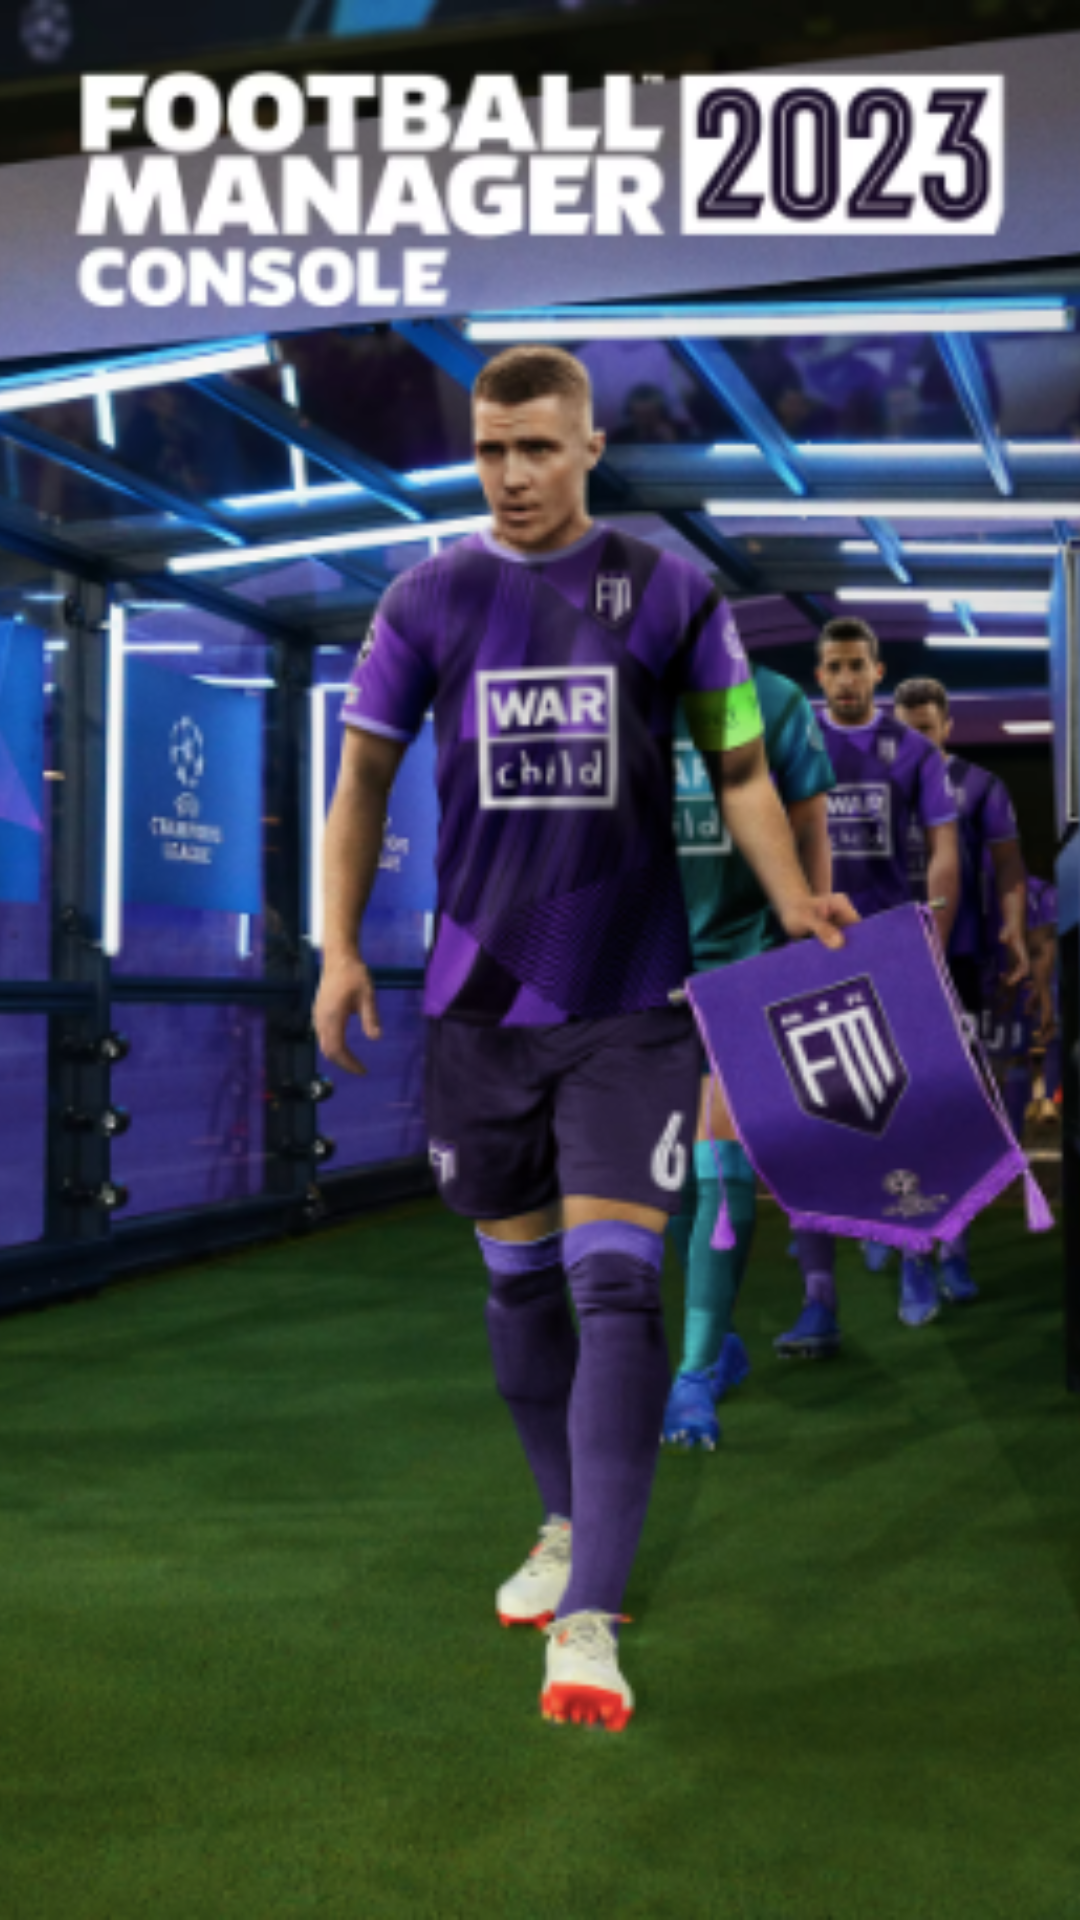 Prime Gaming September titles include Football Manager 2023,  wine-making sim Hundred Days